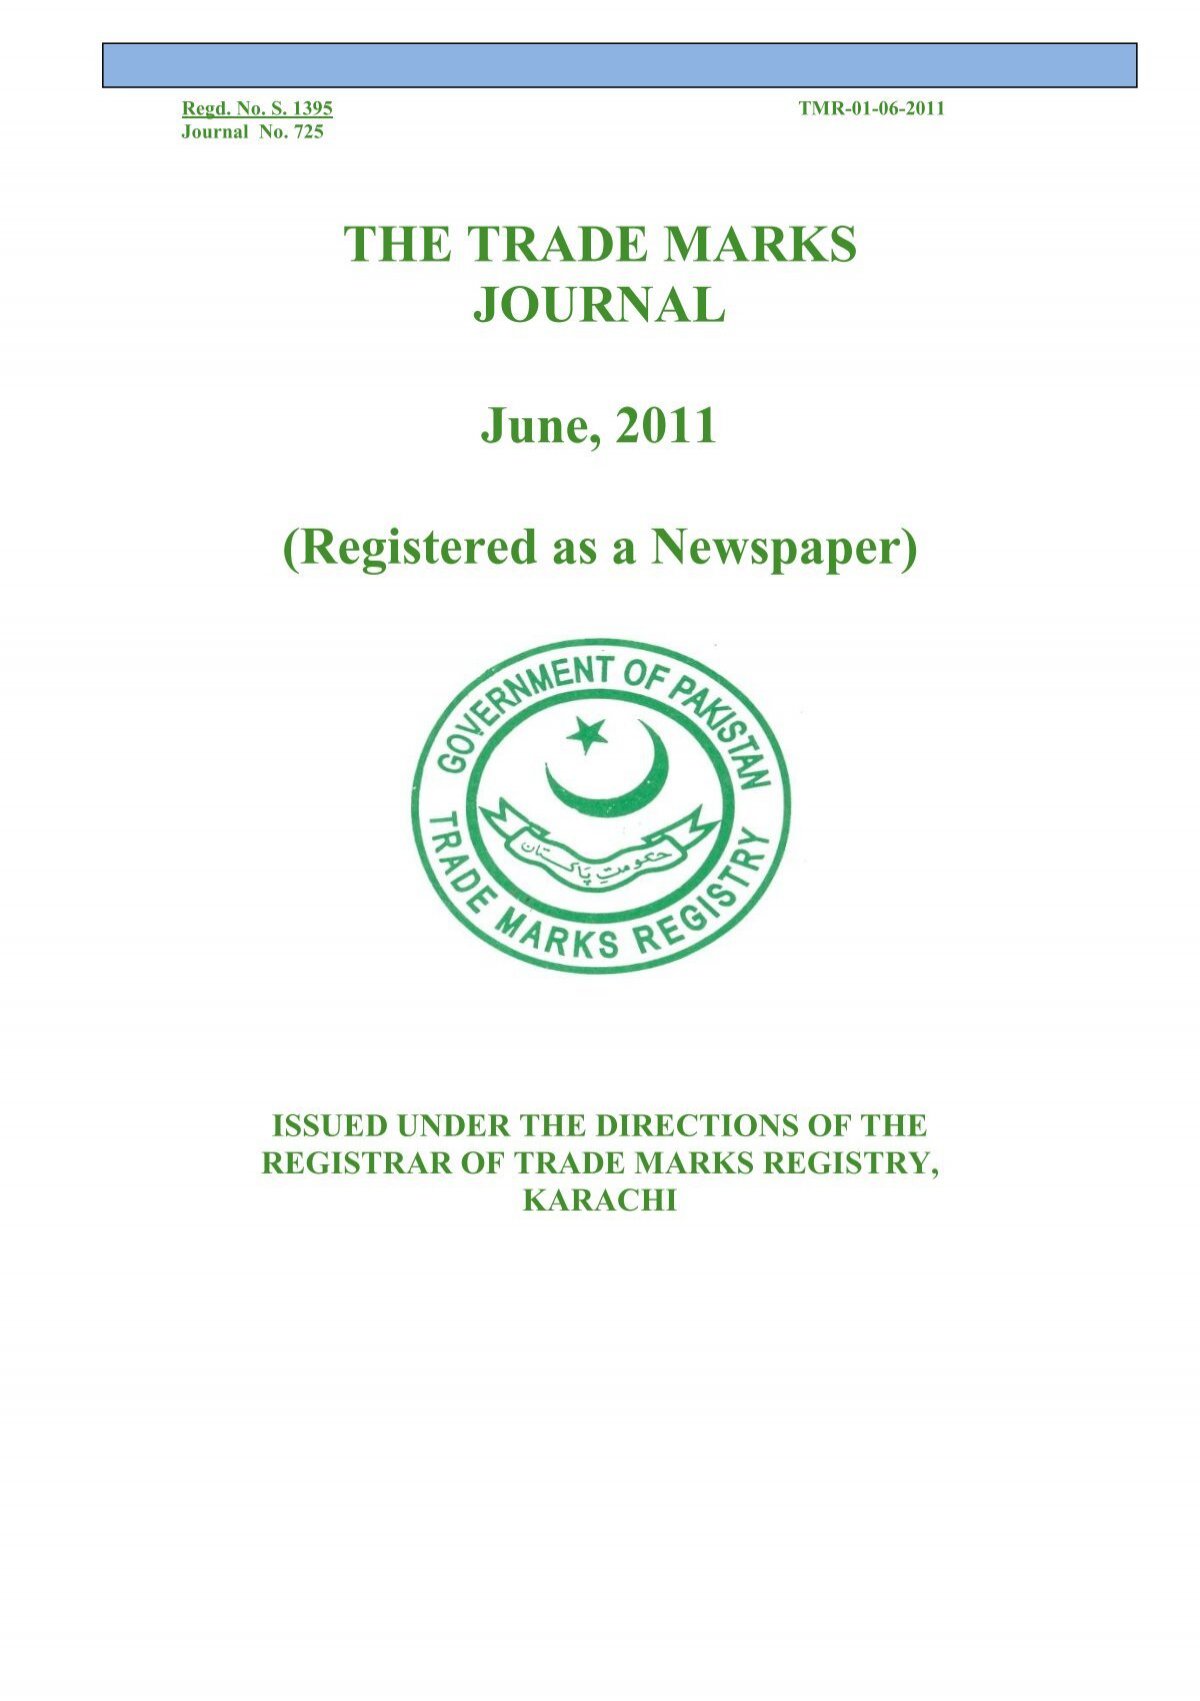 THE TRADE MARKS JOURNAL June, 2011  - IPO Pakistan